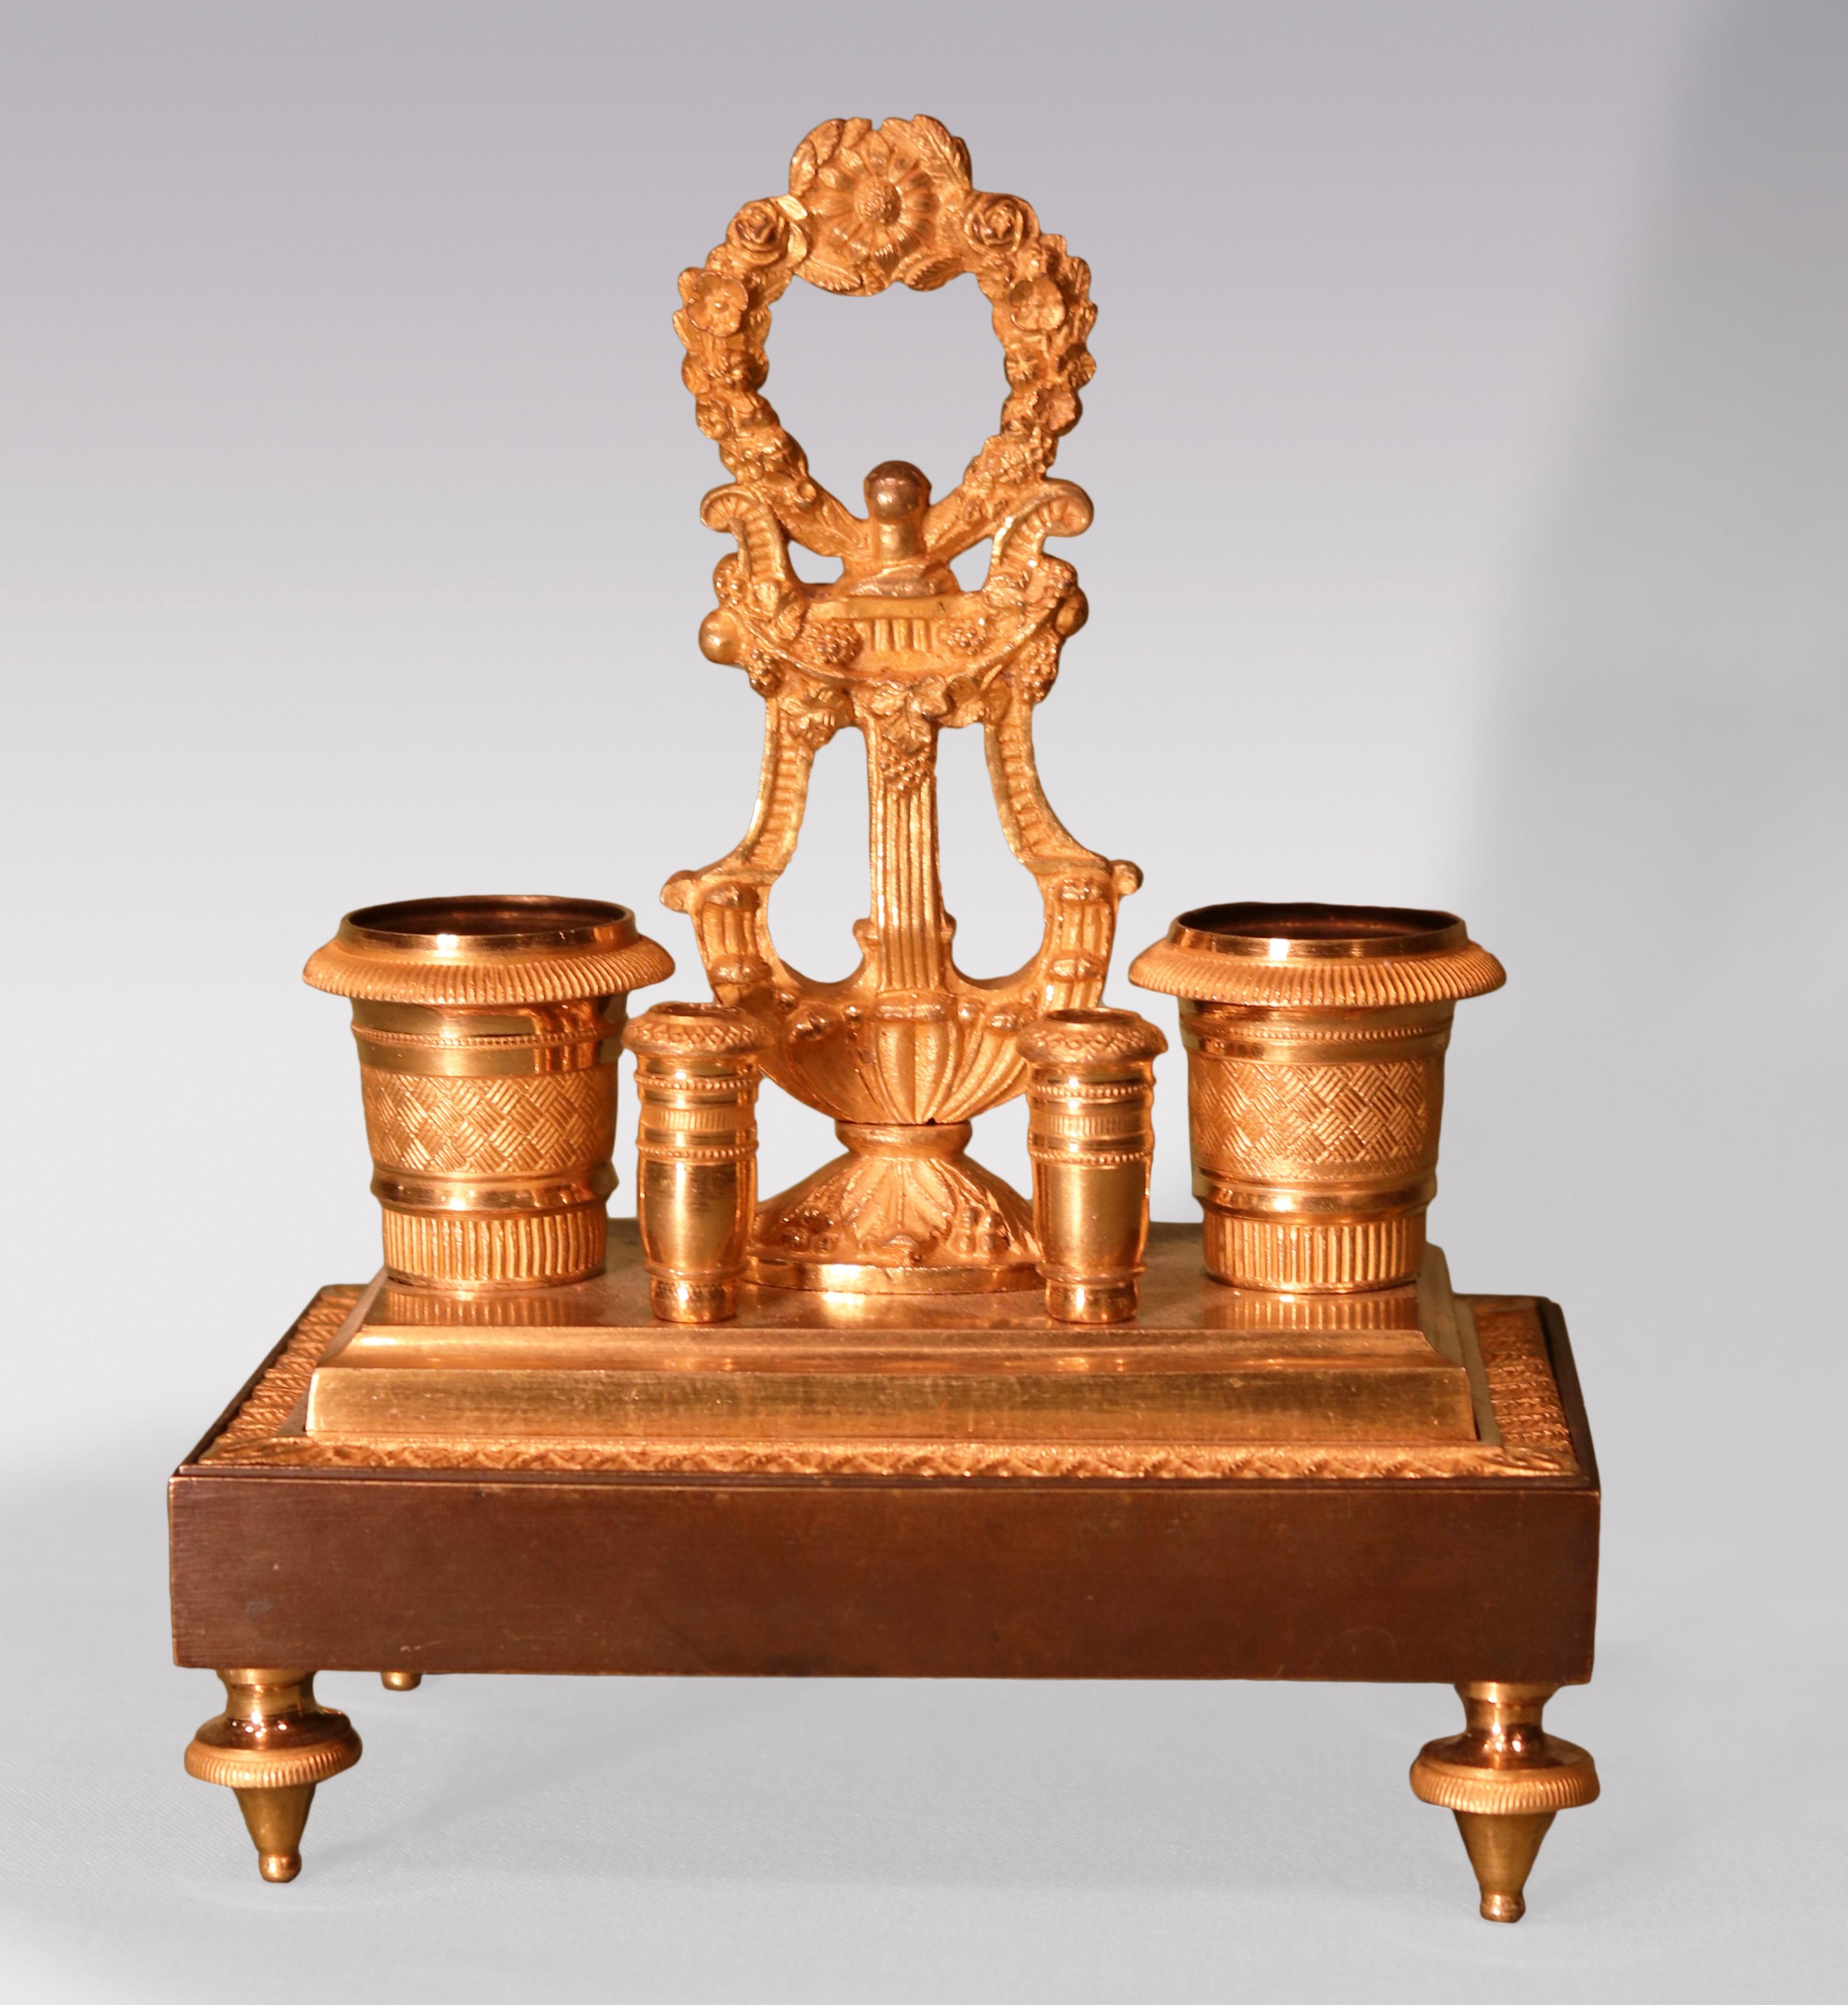 An early 19th century bronze and ormolu Encrier having lyre and flower handle flanked by engine-turned inkwells with penholders, raised on platform base ending on toupee feet.